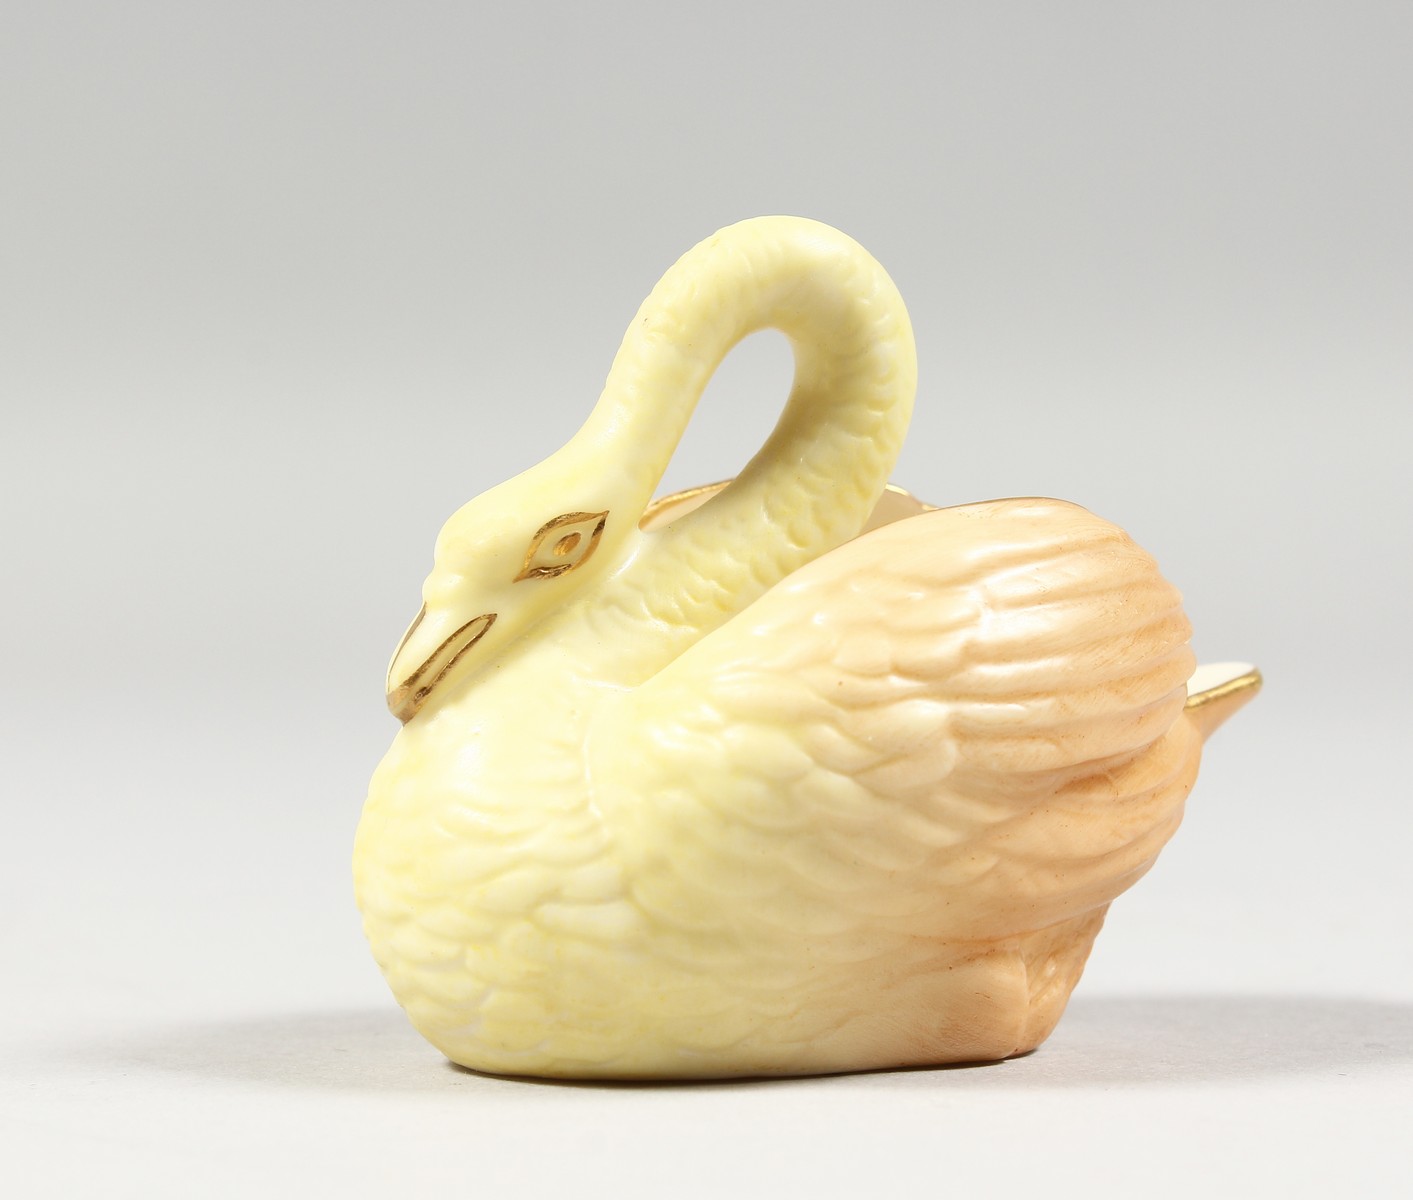 A ROYAL WORCESTER RARE BLUSH IVORY MINIATURE MODEL OF A SWAN, date code 1903.